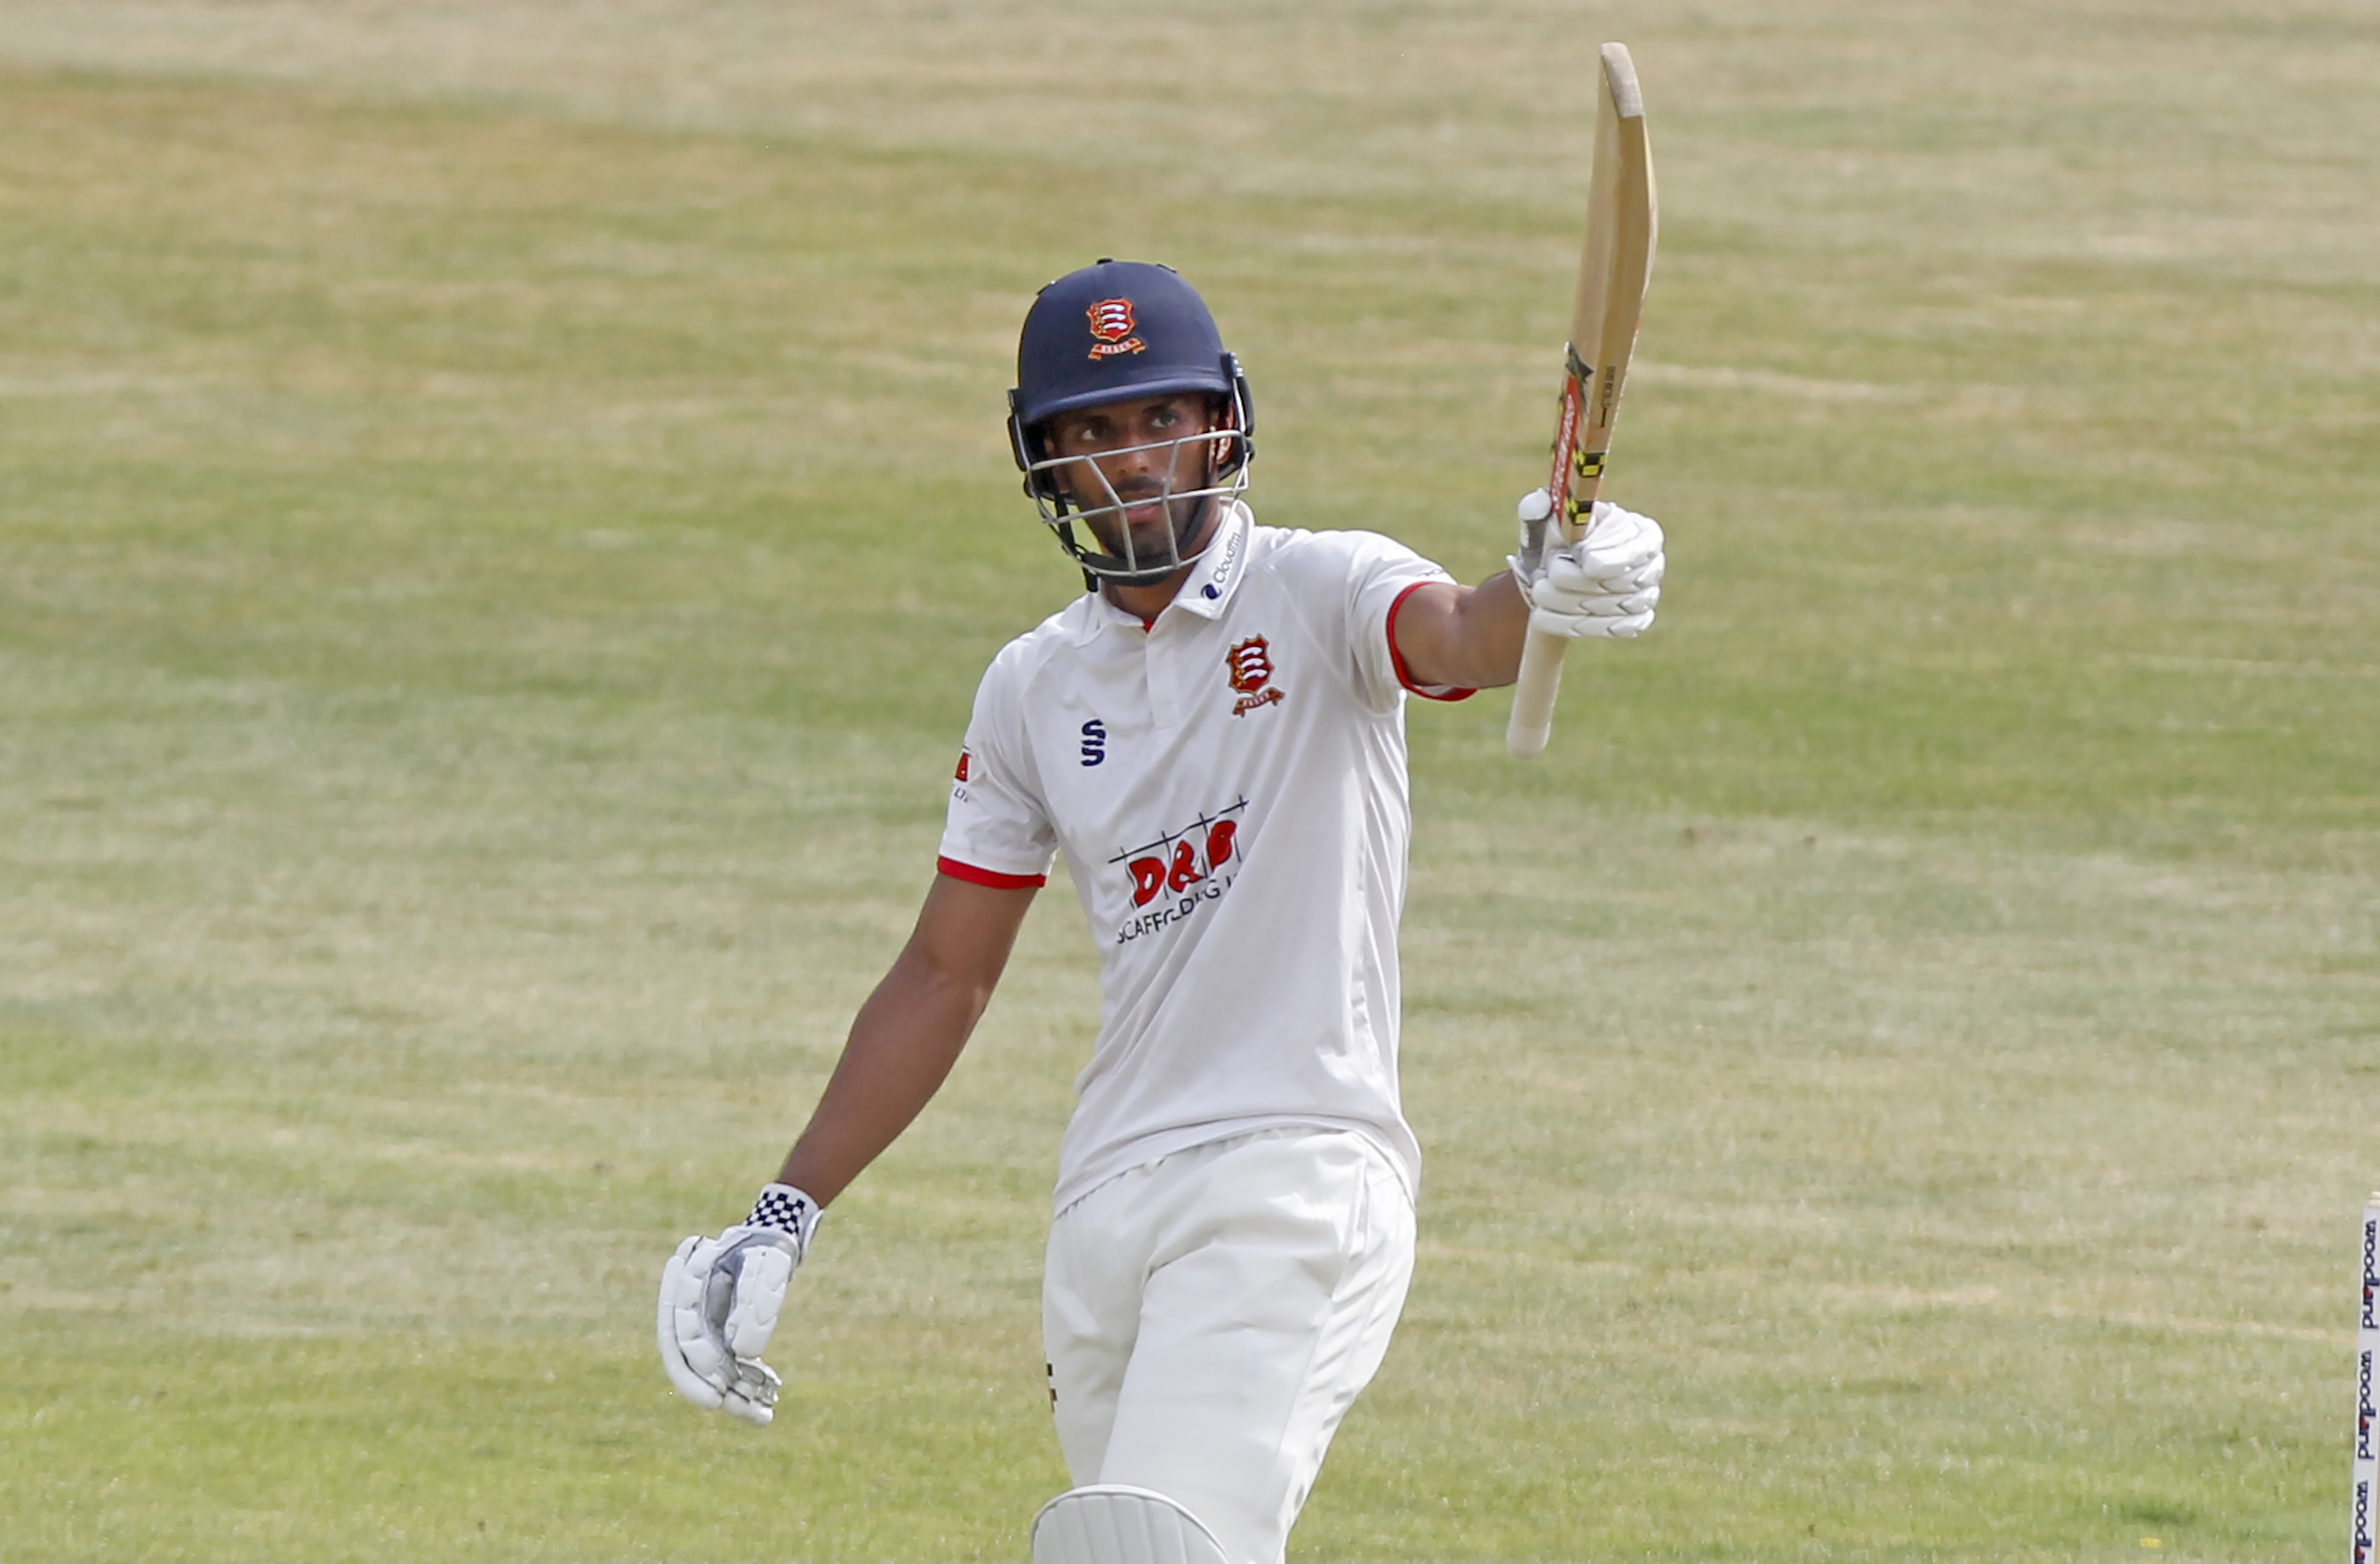 Feroze Khushi of Essex celebrates scoring 50 runs during Essex vs Surrey in the Bob Willis Trophy at The Cloudfm County Ground on 8 August.